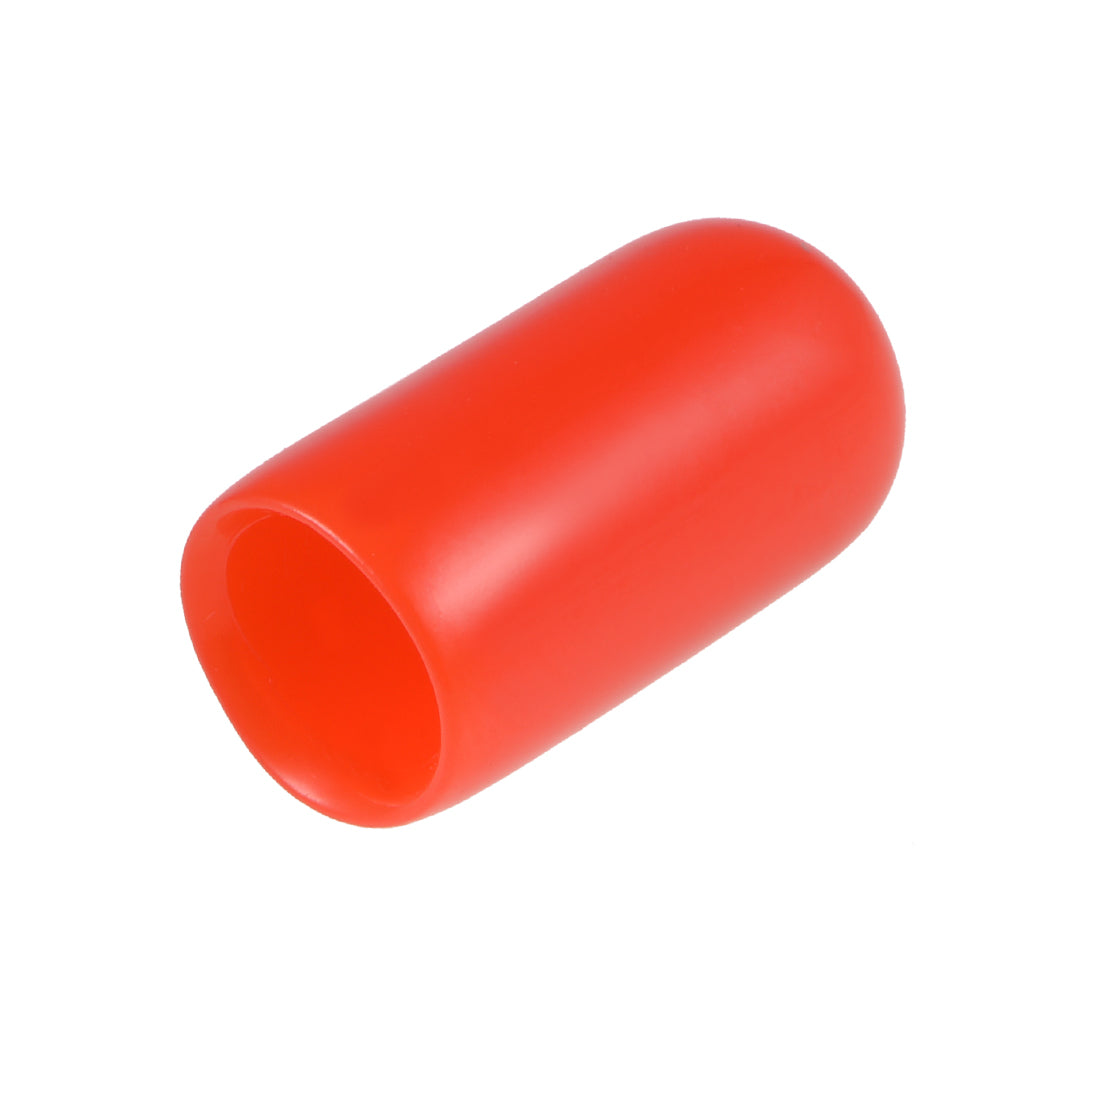 uxcell Uxcell 80pcs Rubber End Caps 6mm ID 15mm Height Screw Thread Protectors Red